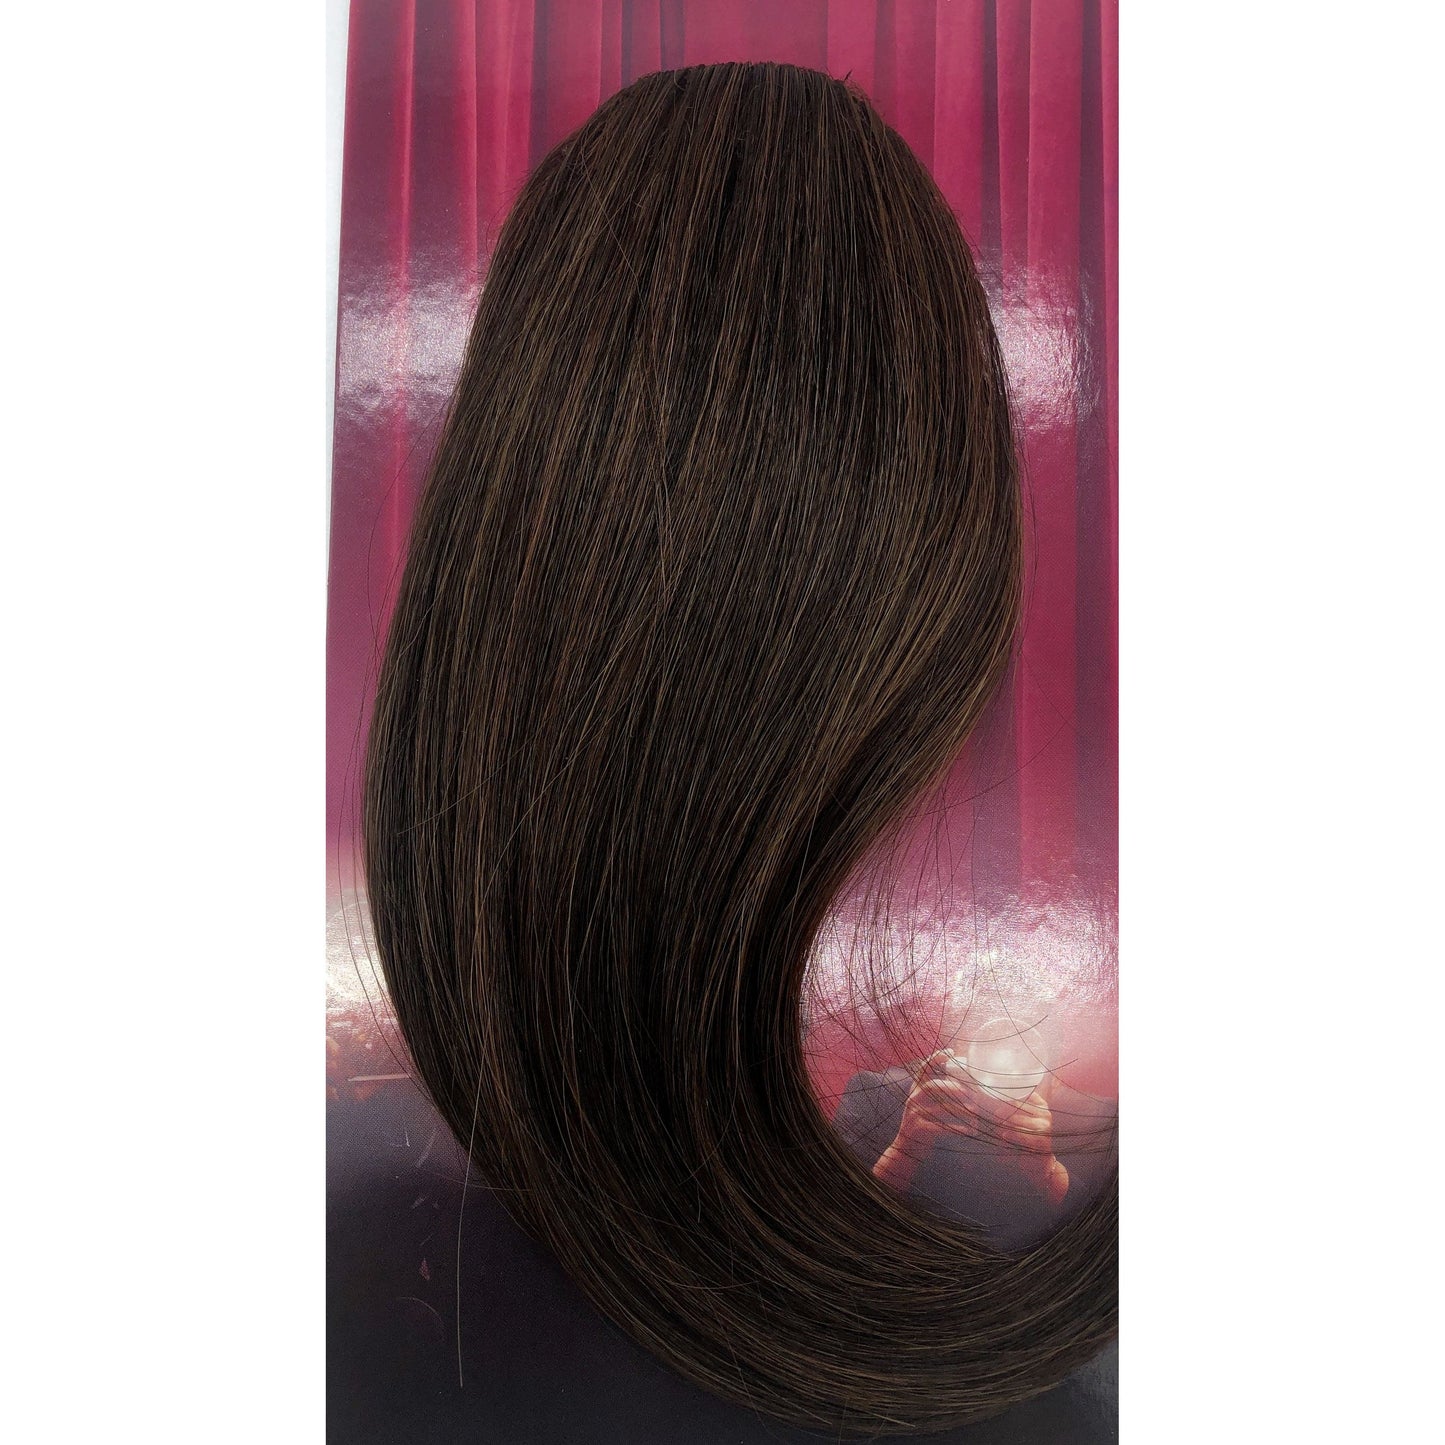 E! SWEPT AWAY SIDE BANG - by Hairdo - VIP Extensions